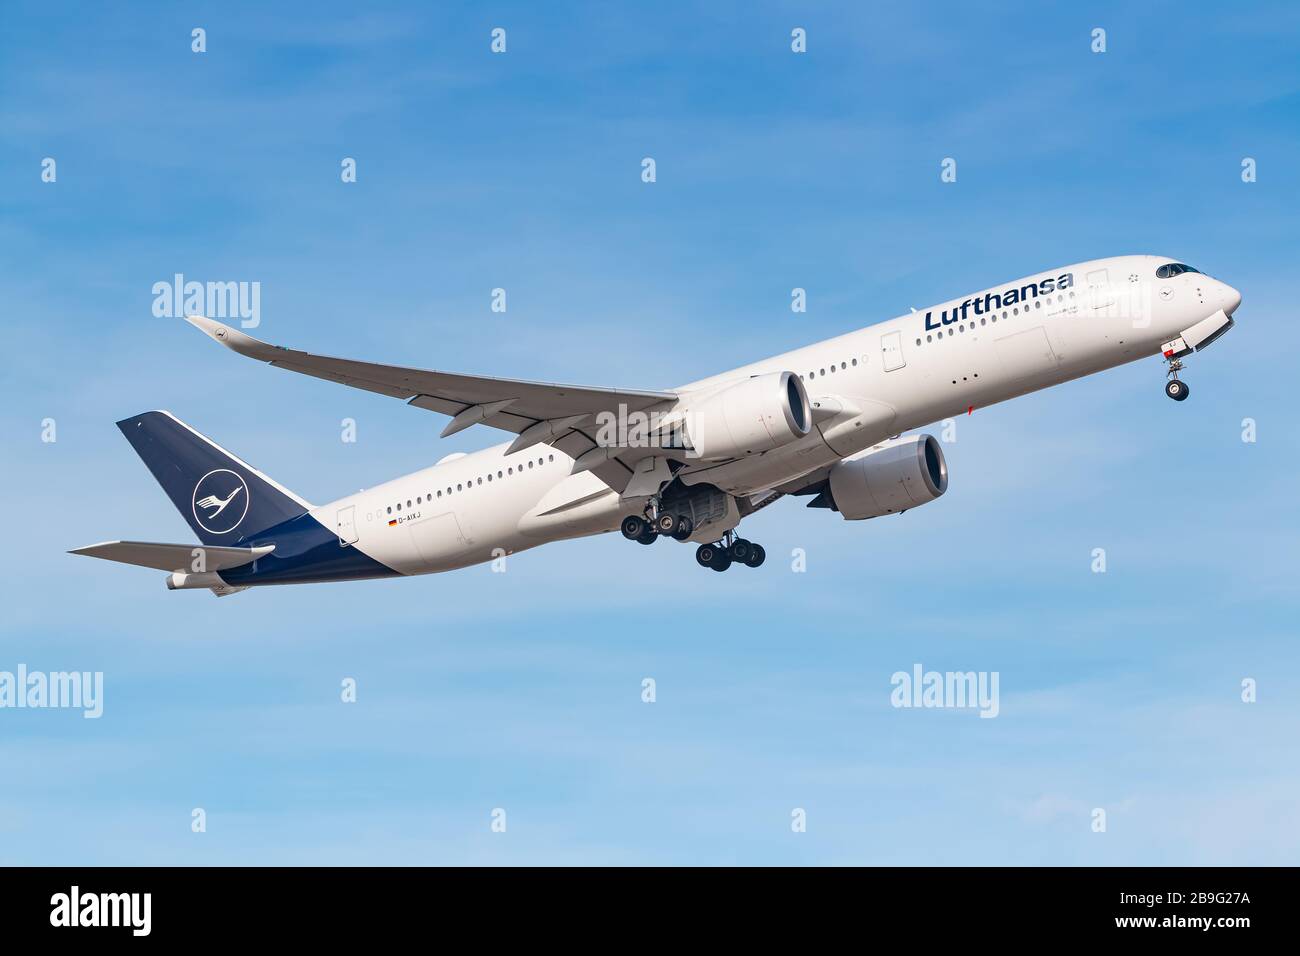 Munich, Germany - Feburary 15, 2020: Lufthansa Airbus A350 airplane at Munich airport (MUC) in Germany. Airbus is an aircraft manufacturer from Toulou Stock Photo